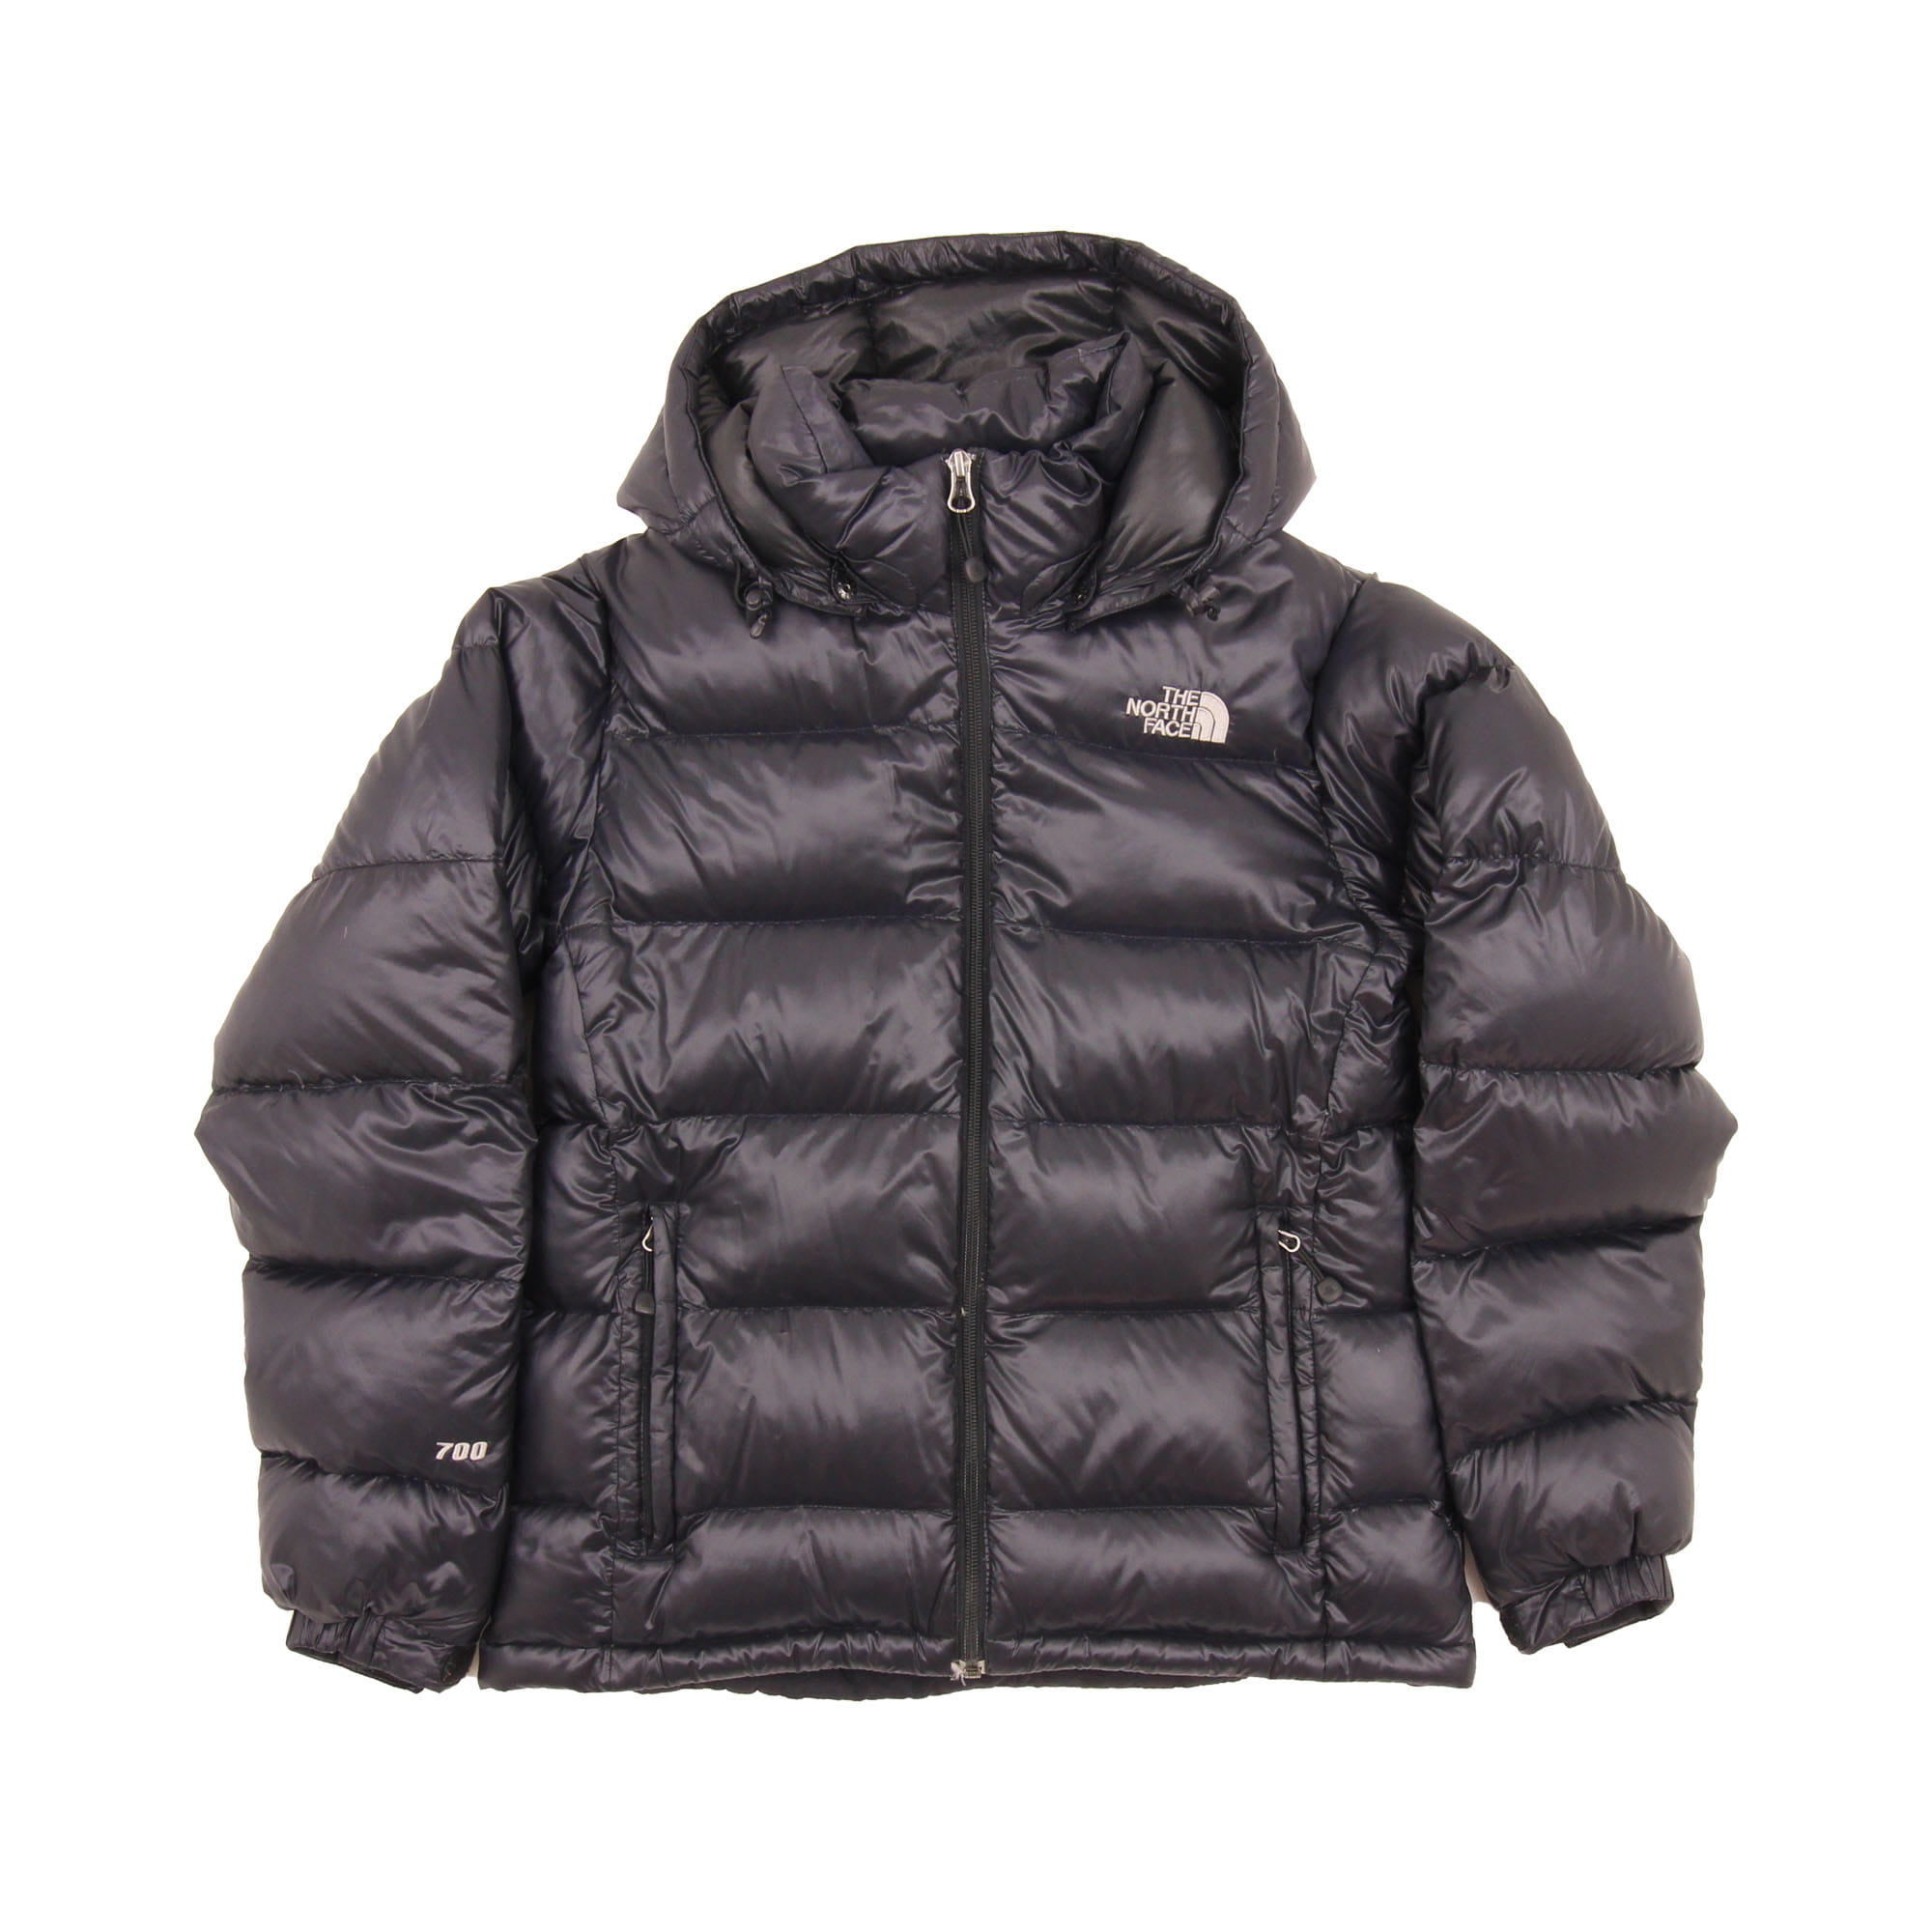 The North Face 700 Puffer Jacket -  XS/S